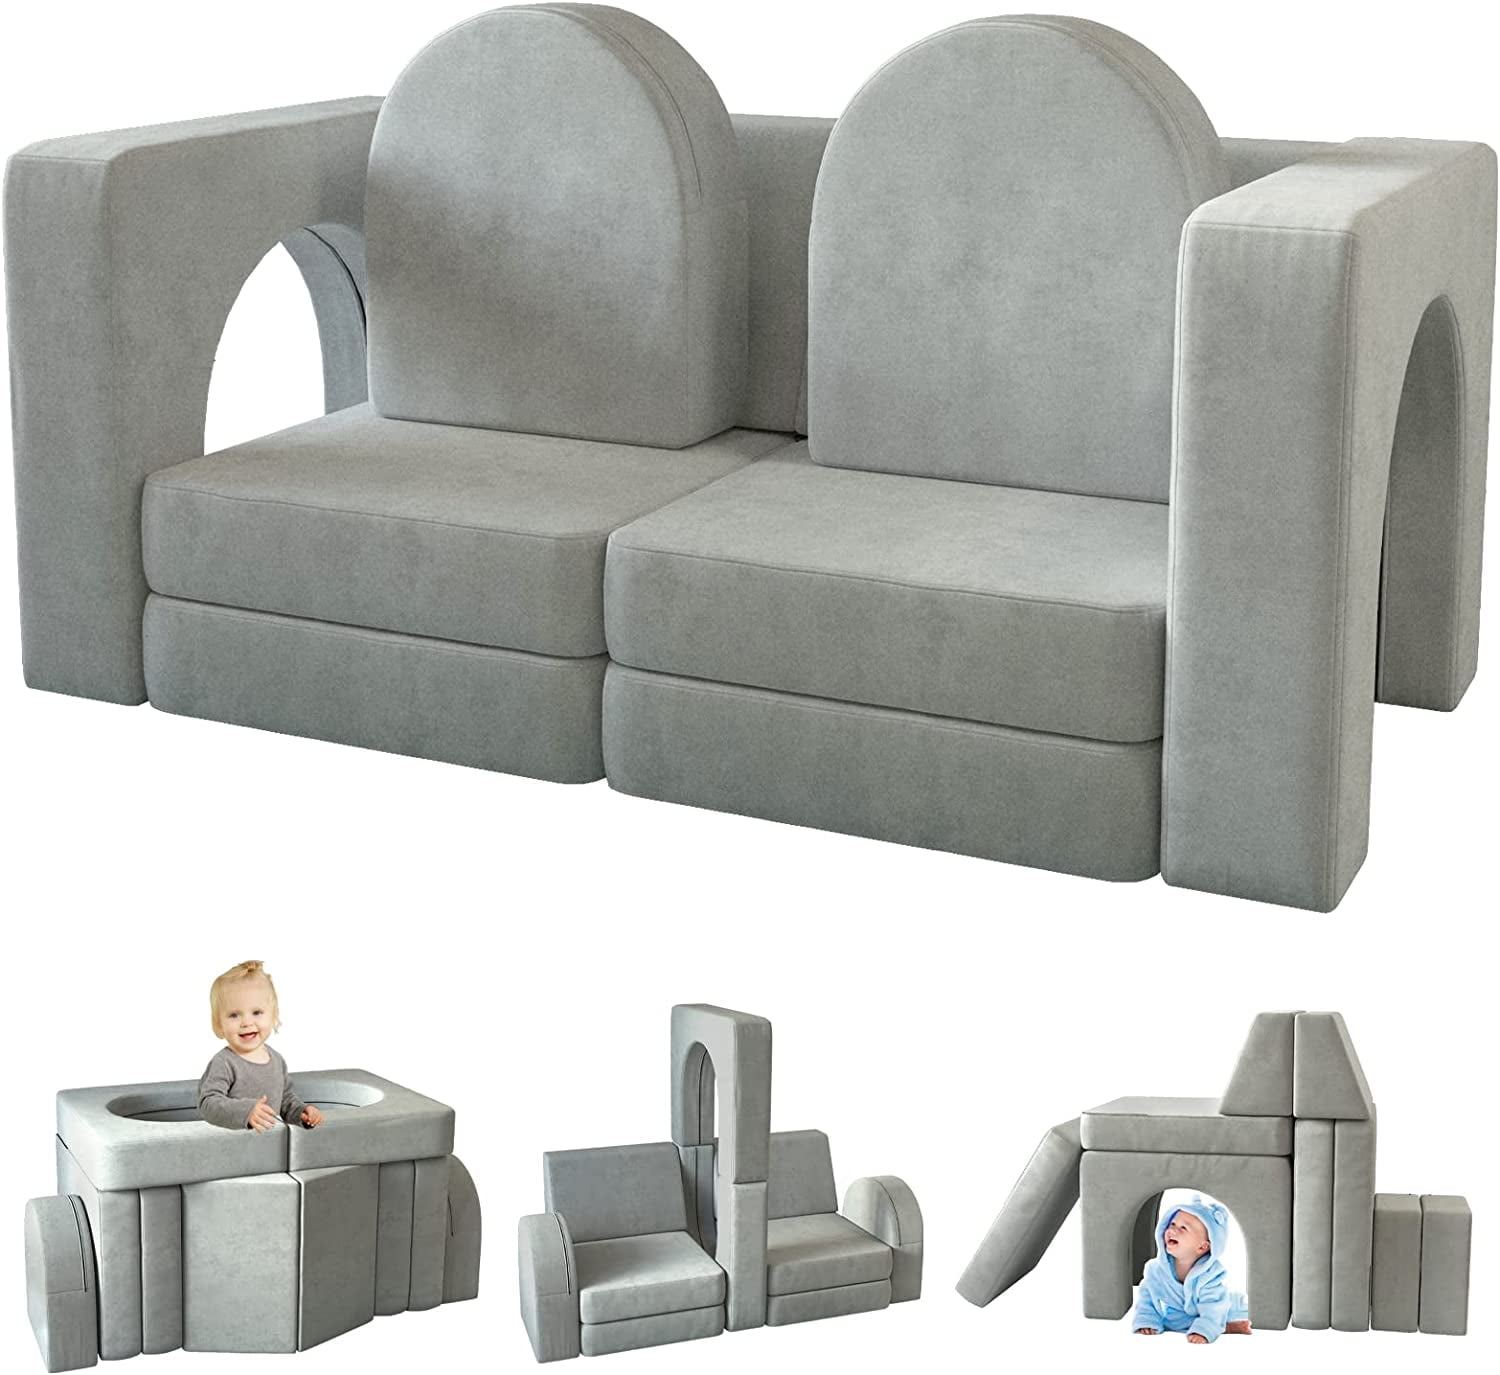 Couch Grey Kid for Couch Dutch Multifunctional Couch, Playroom, Kids Modular Velvet 12PCS, Linor Toddler